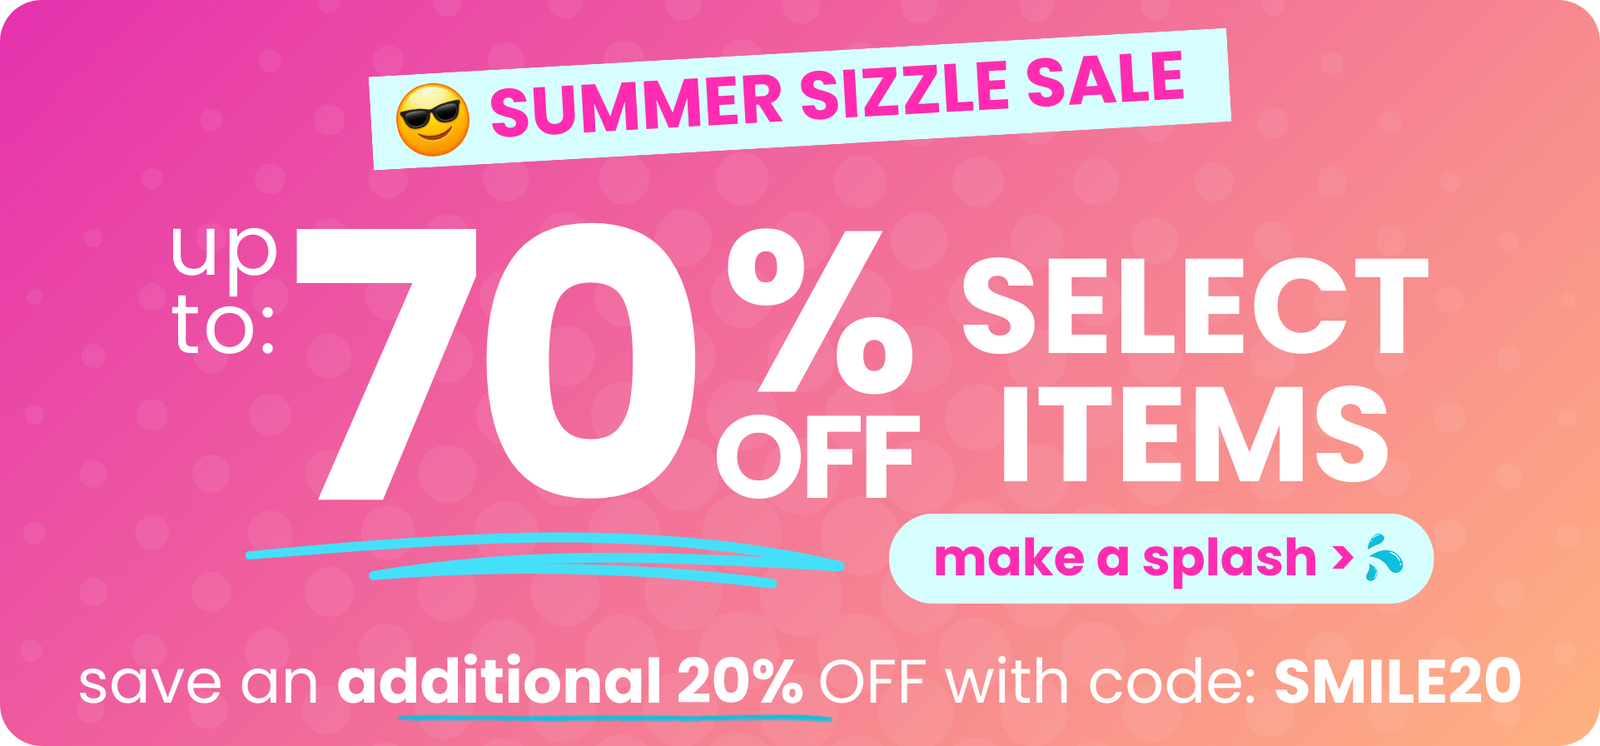 Summer sizzle sale! Up to 70% OFF select items. Take an additional 20% off with code: SMILE20.